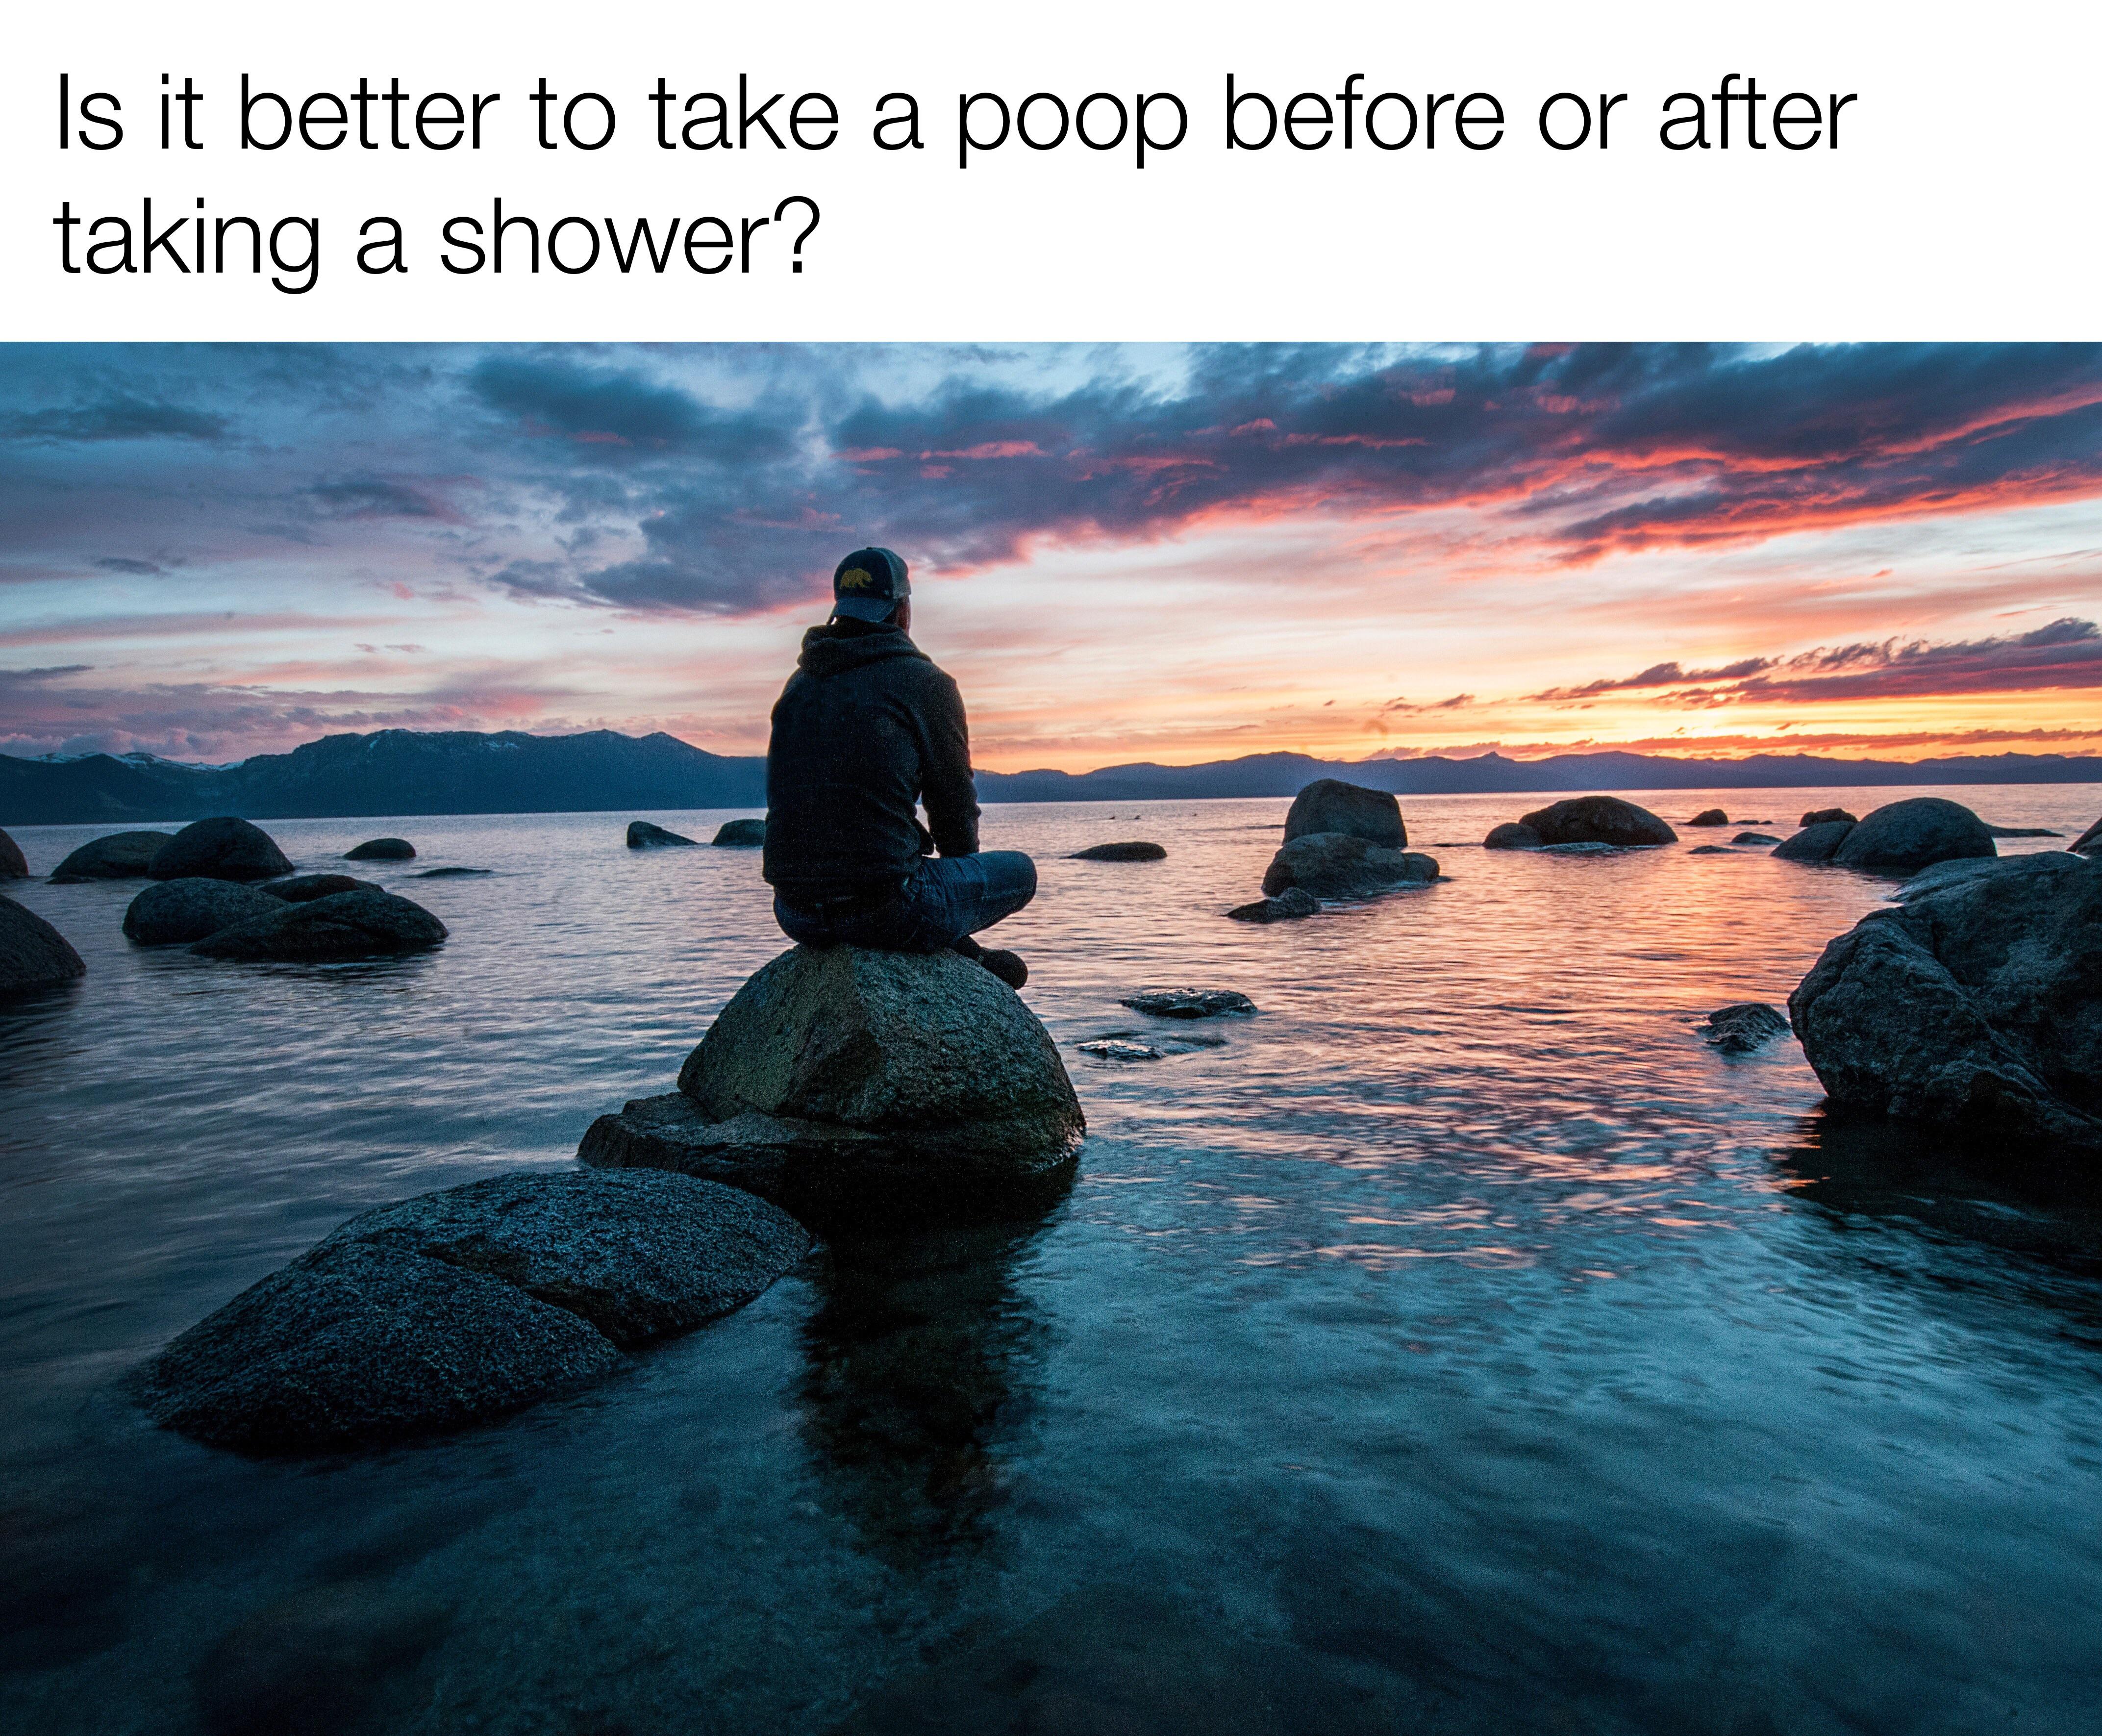 funny memes - dank memes -mind relaxation - Is it better to take a poop before or after taking a shower?